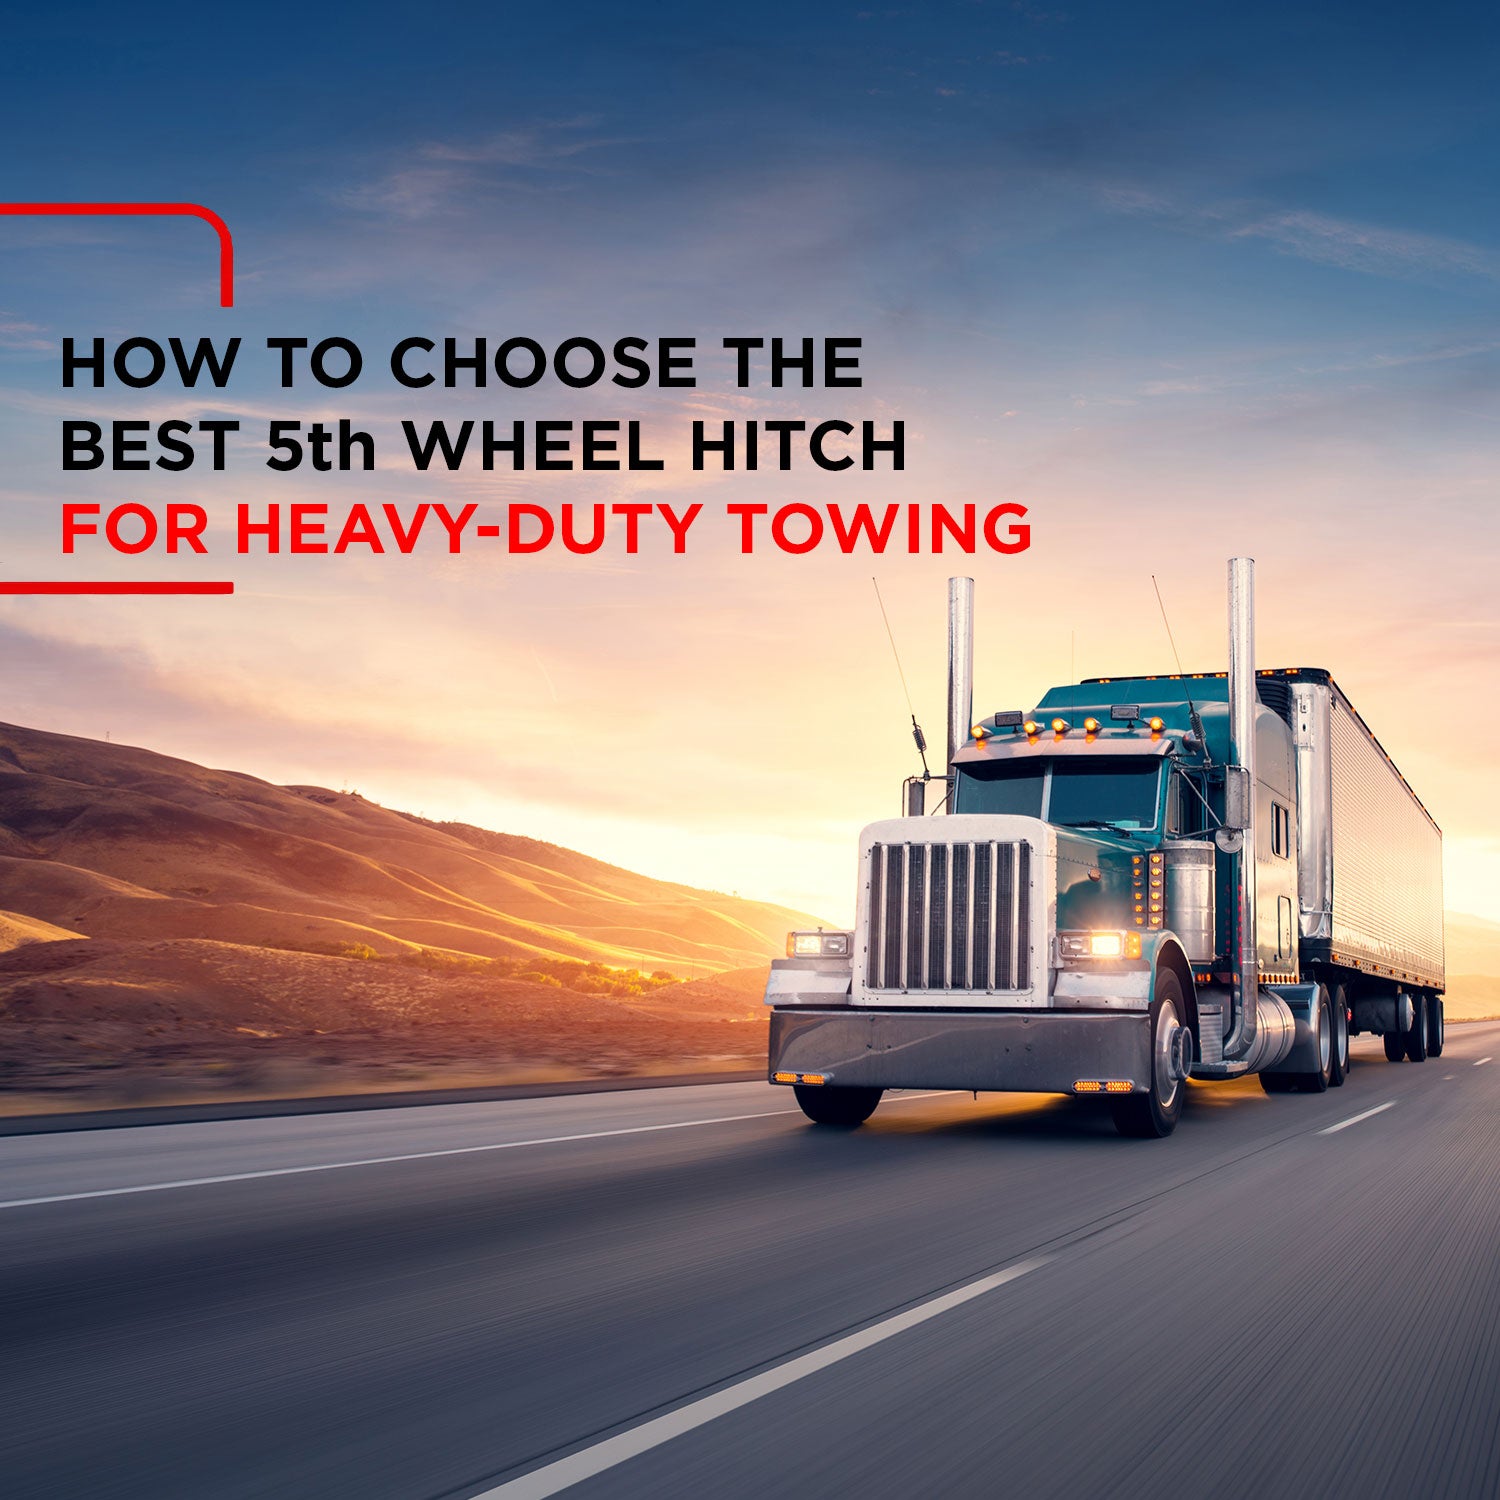 How to Choose The Best 5th Wheel Hitch for Heavy-Duty Towing